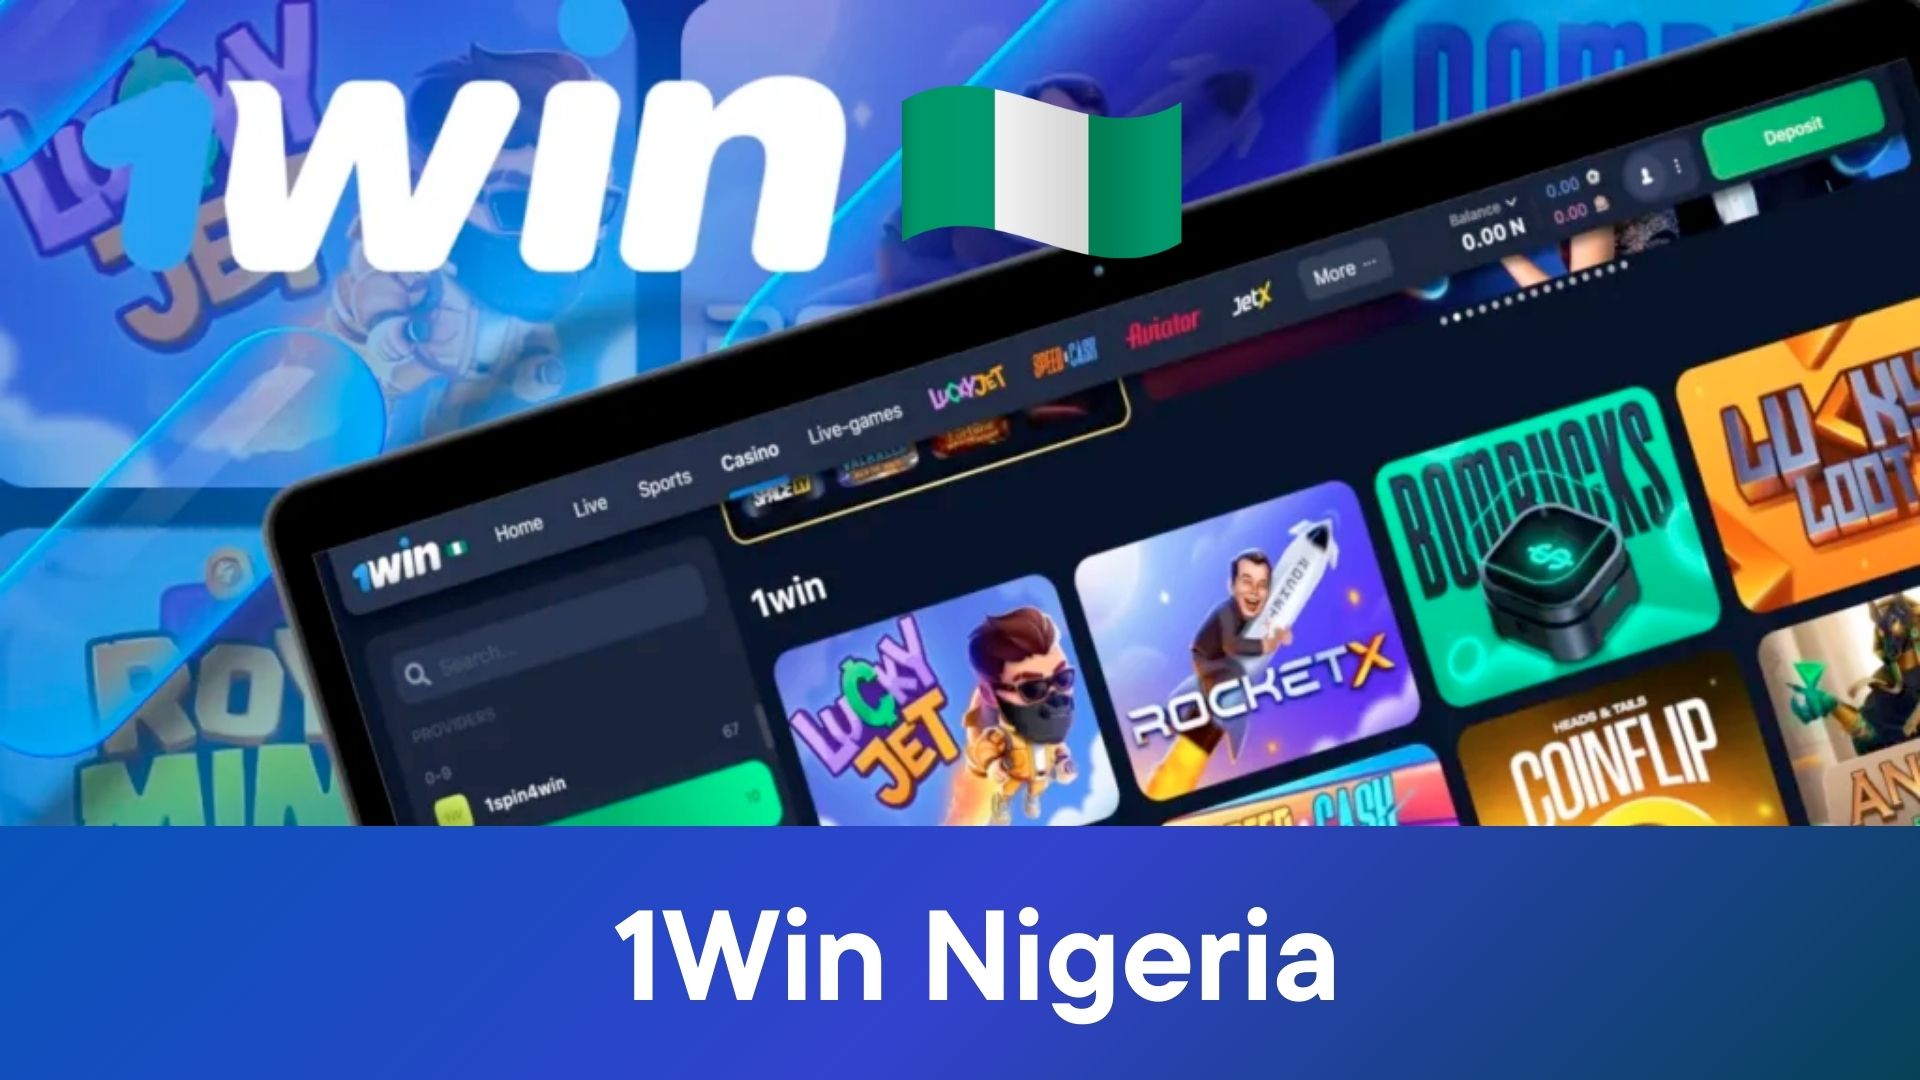 Payment Operations at 1win Nigeria